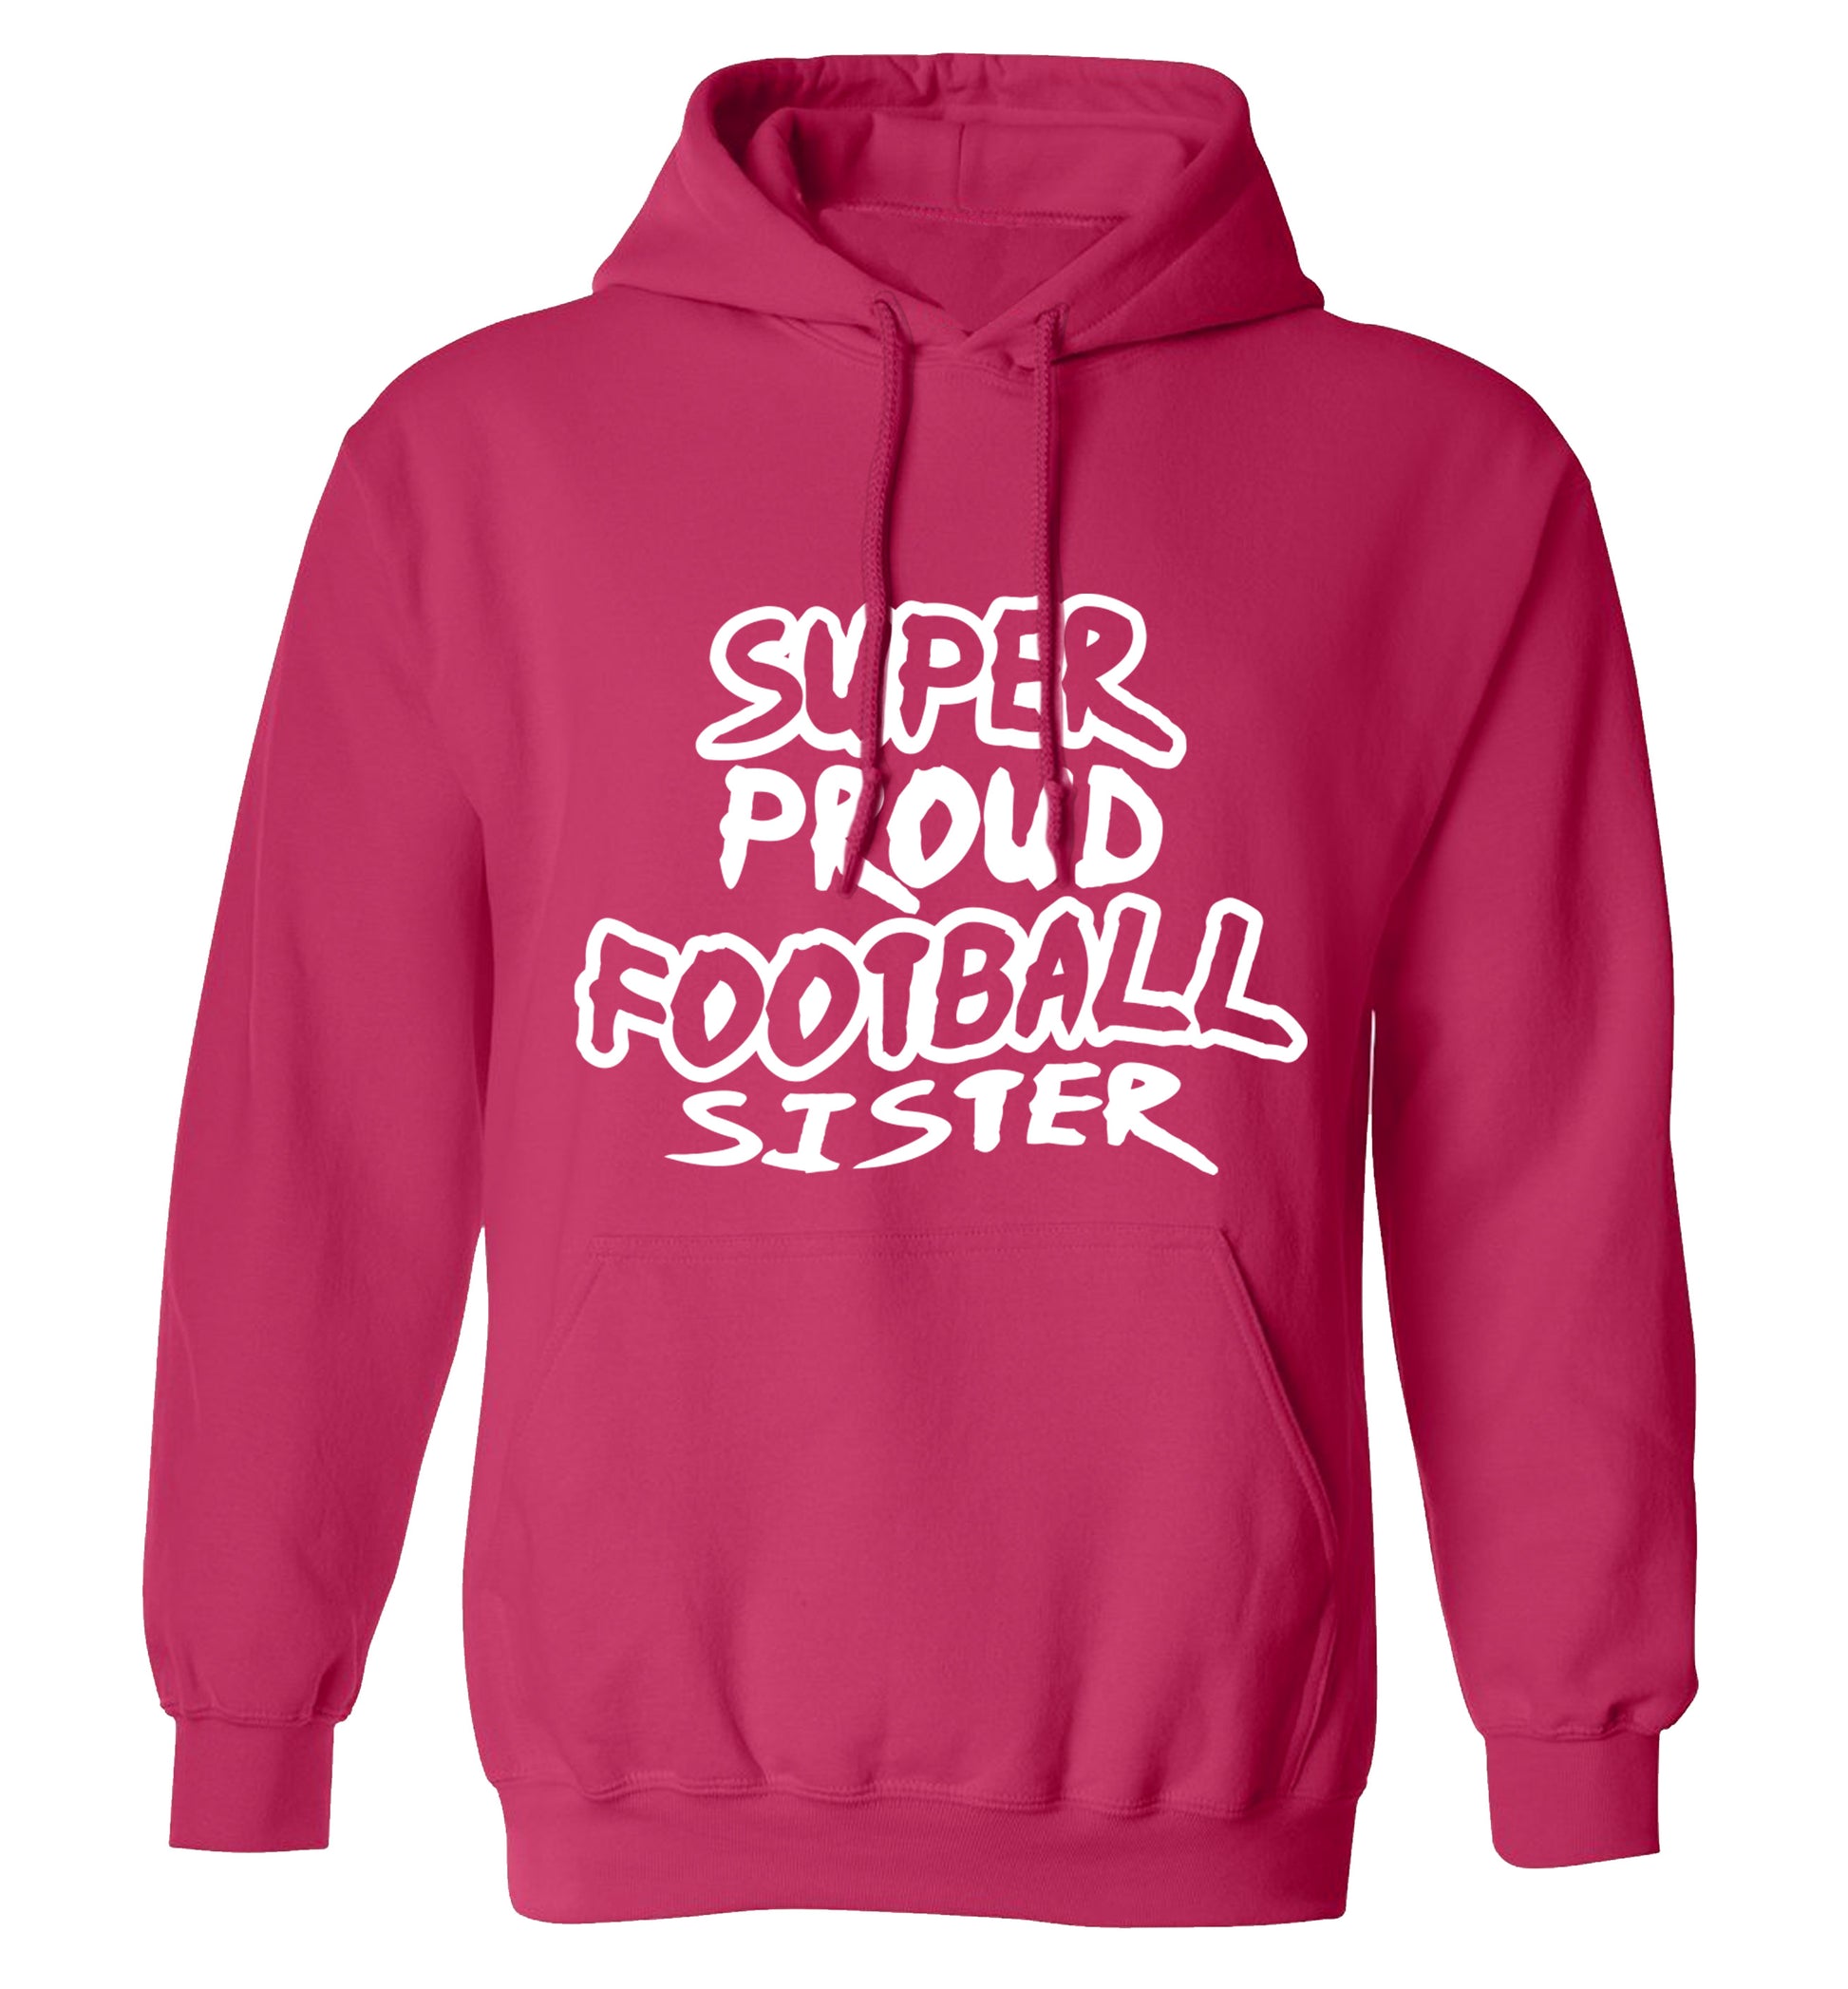 Super proud football sister adults unisexpink hoodie 2XL